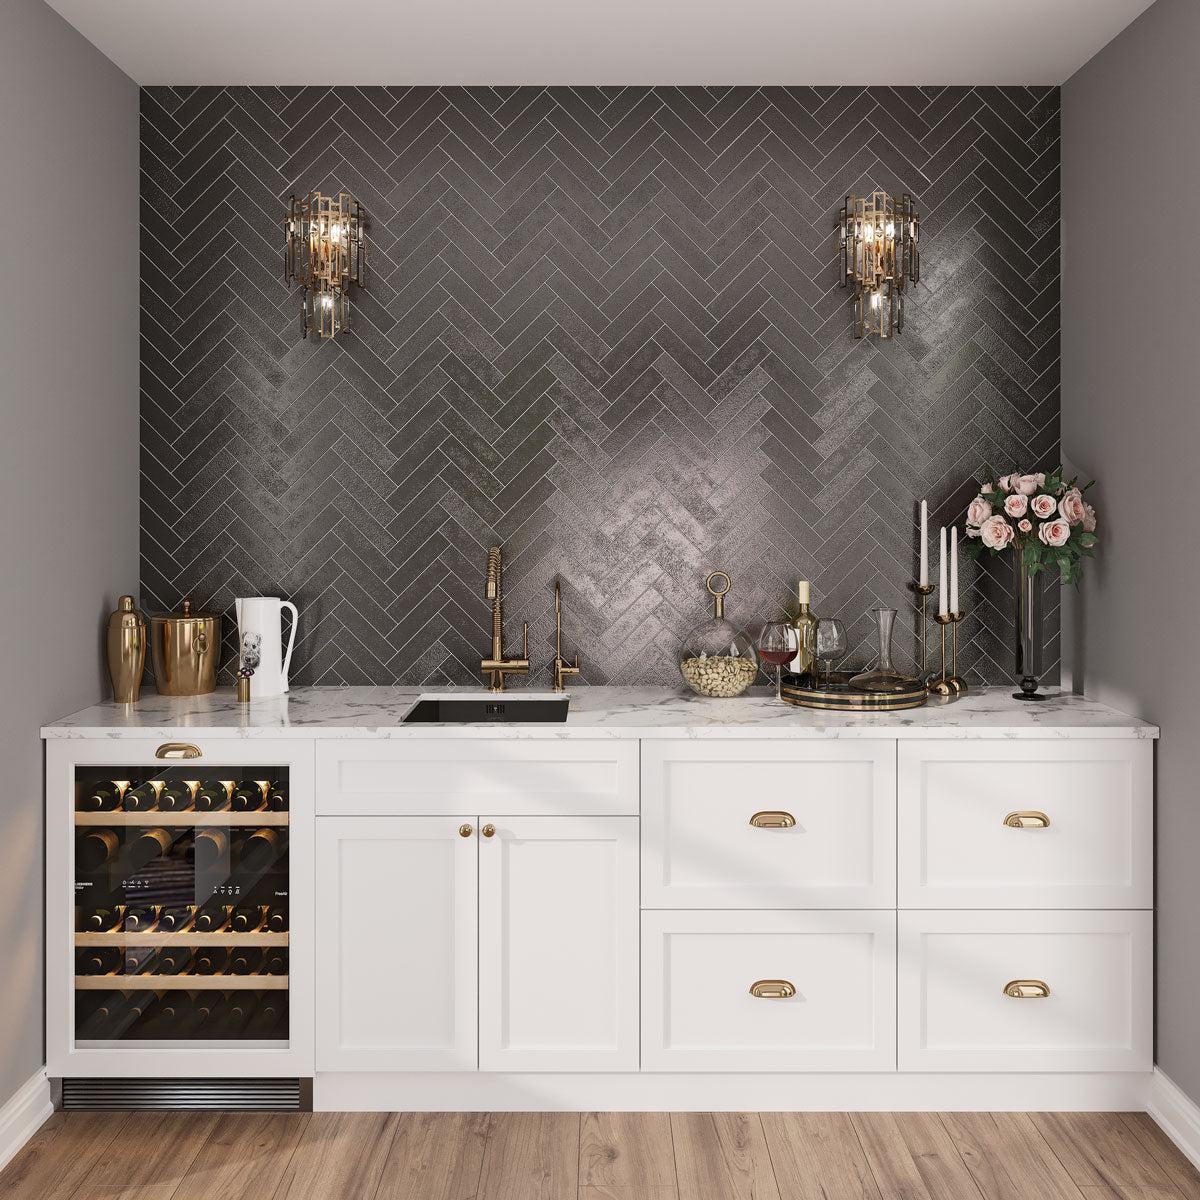 Contemporary black and white bar backsplash with a textured glass subway tile in a herringbone layout